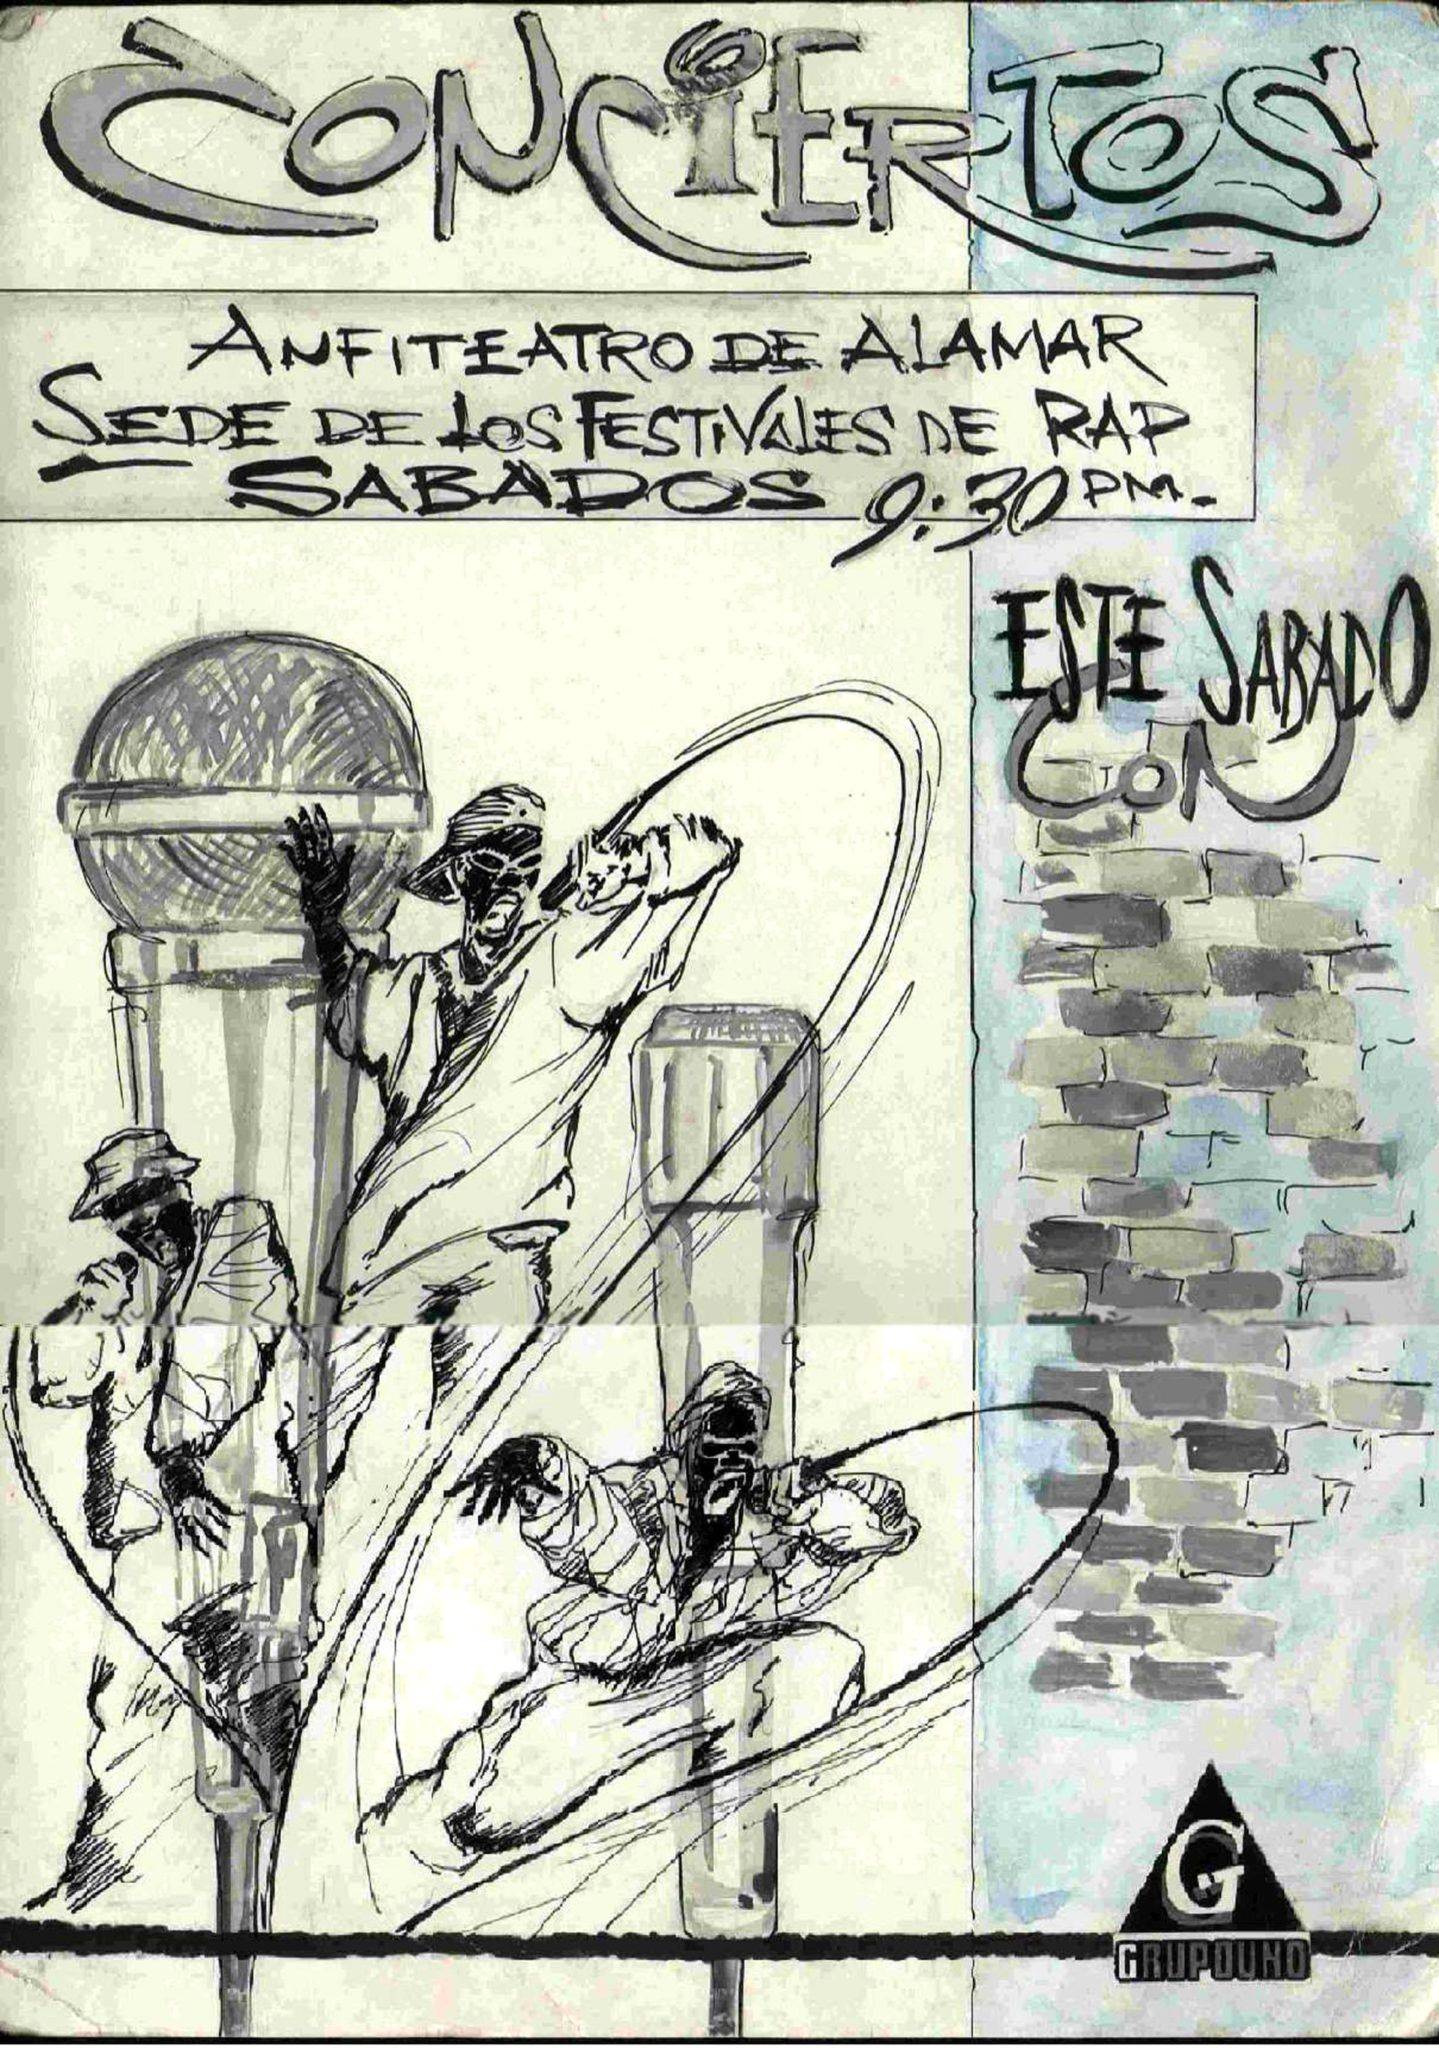 This poster of Tagles Heredia for the promotion of a rap concert at the Alamar Amphitheater is part of the exhibition. Photo: Courtesy of Alejandro Zamora.